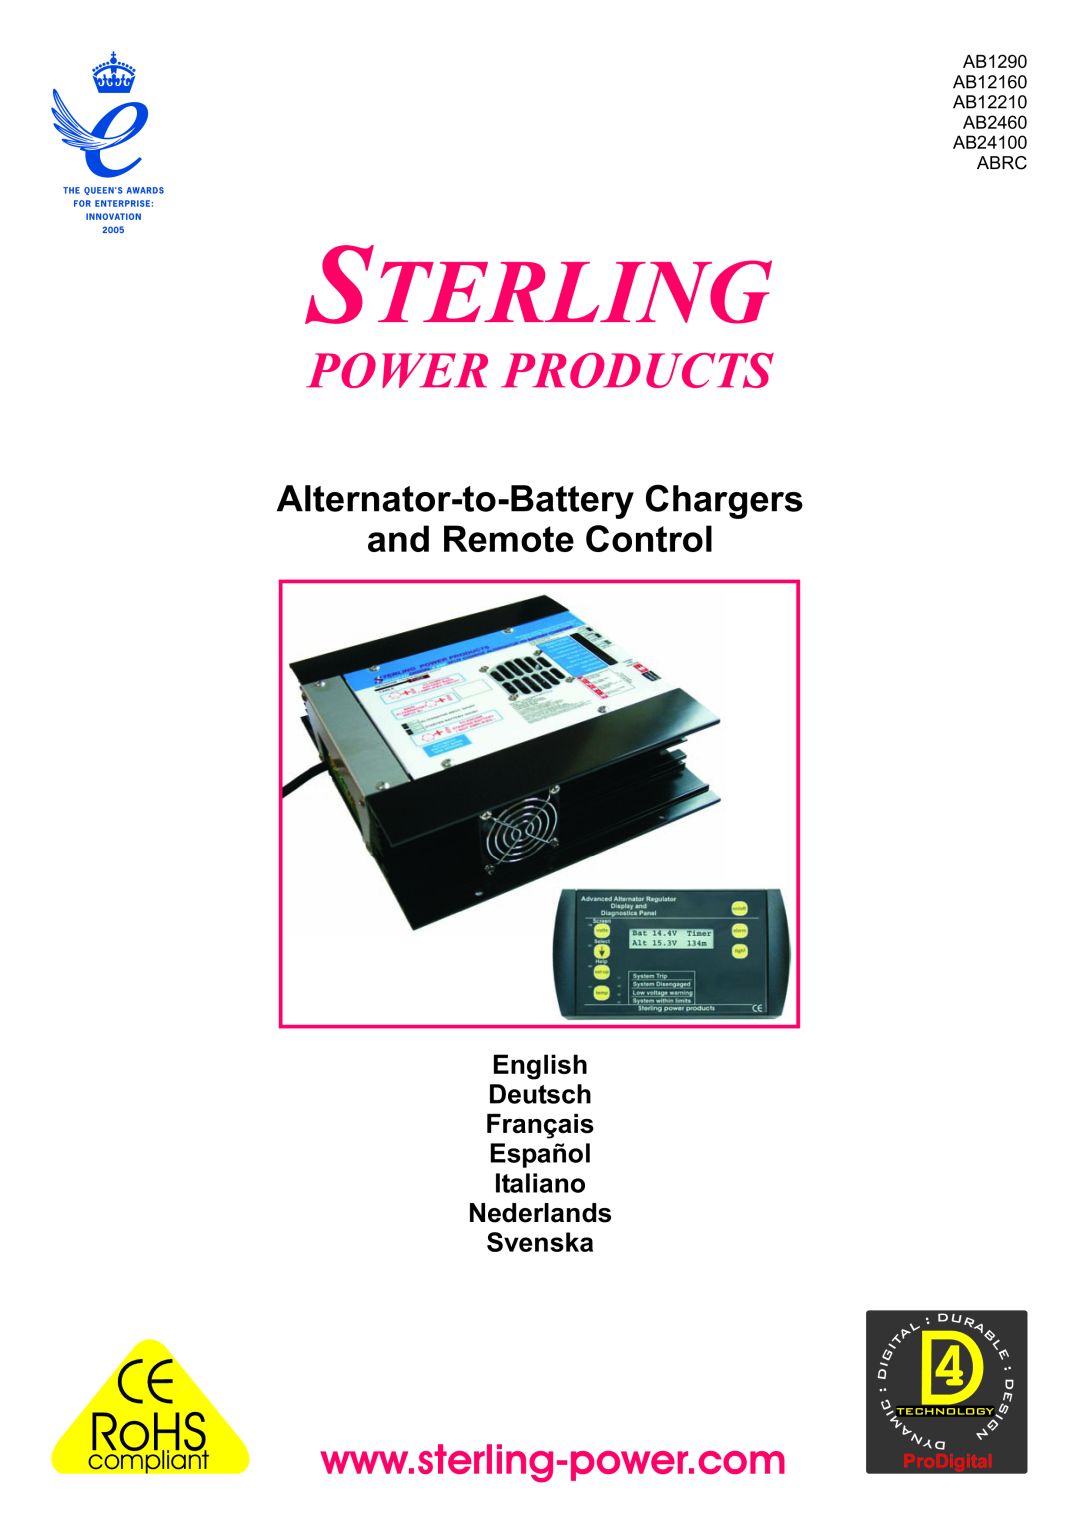 Sterling Power Products AB12210 manual Sterling, RoHS, Power Products, Alternator-to-Battery Chargers and Remote Control 